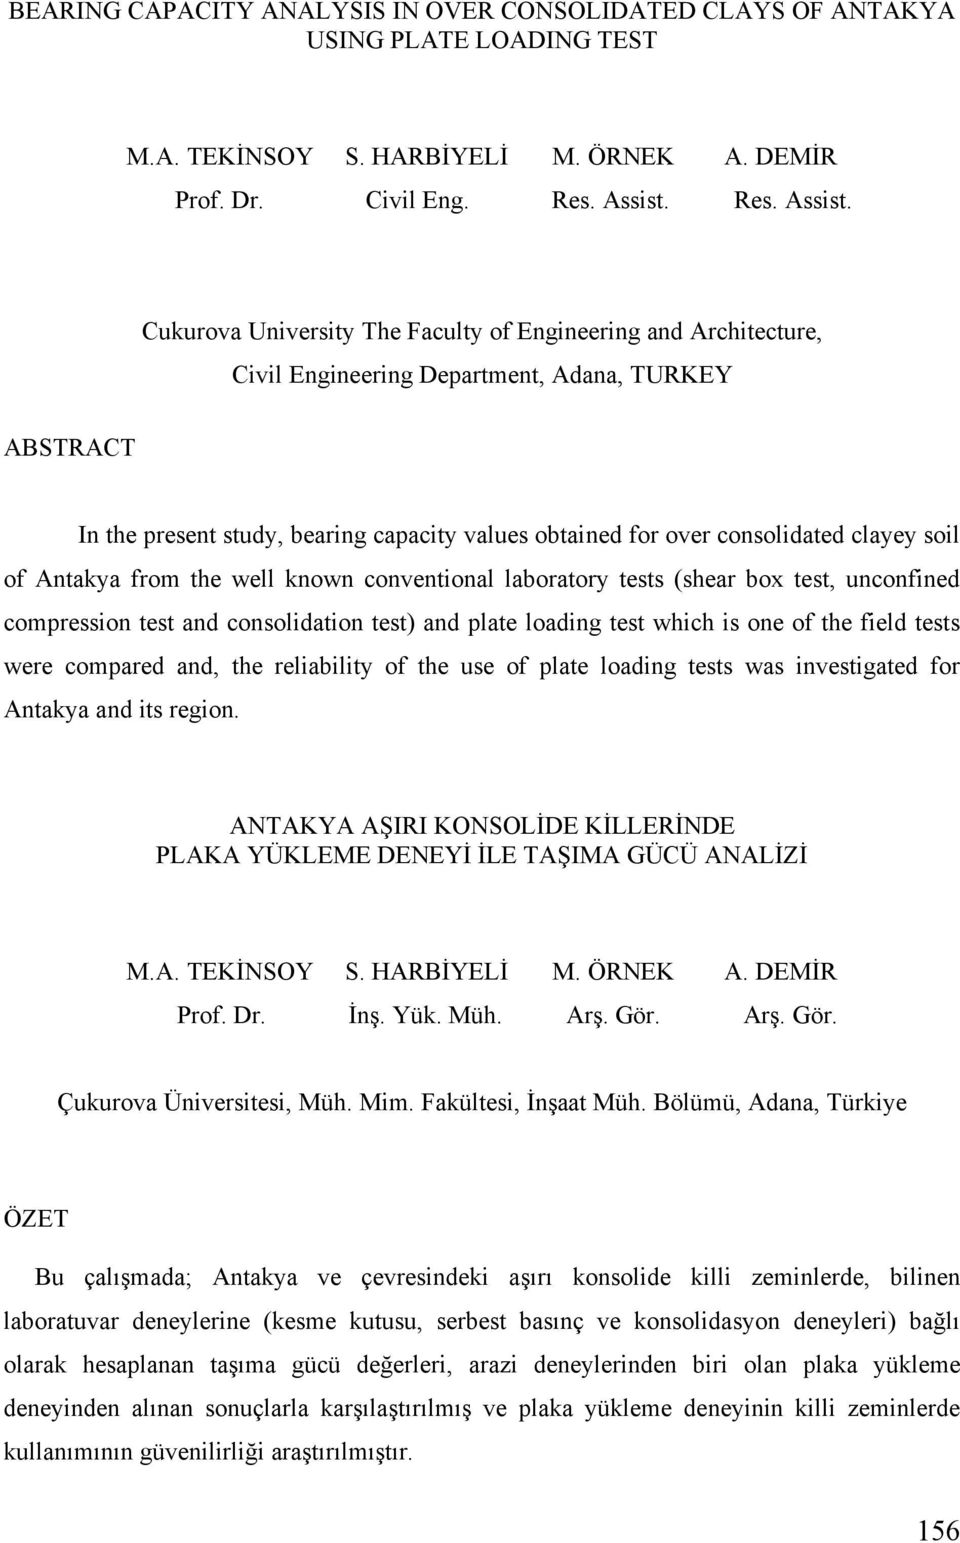 Cukurova University The Faculty of Engineering and Architecture, Civil Engineering Department, Adana, TURKEY ABSTRACT In the present study, bearing capacity values obtained for over consolidated